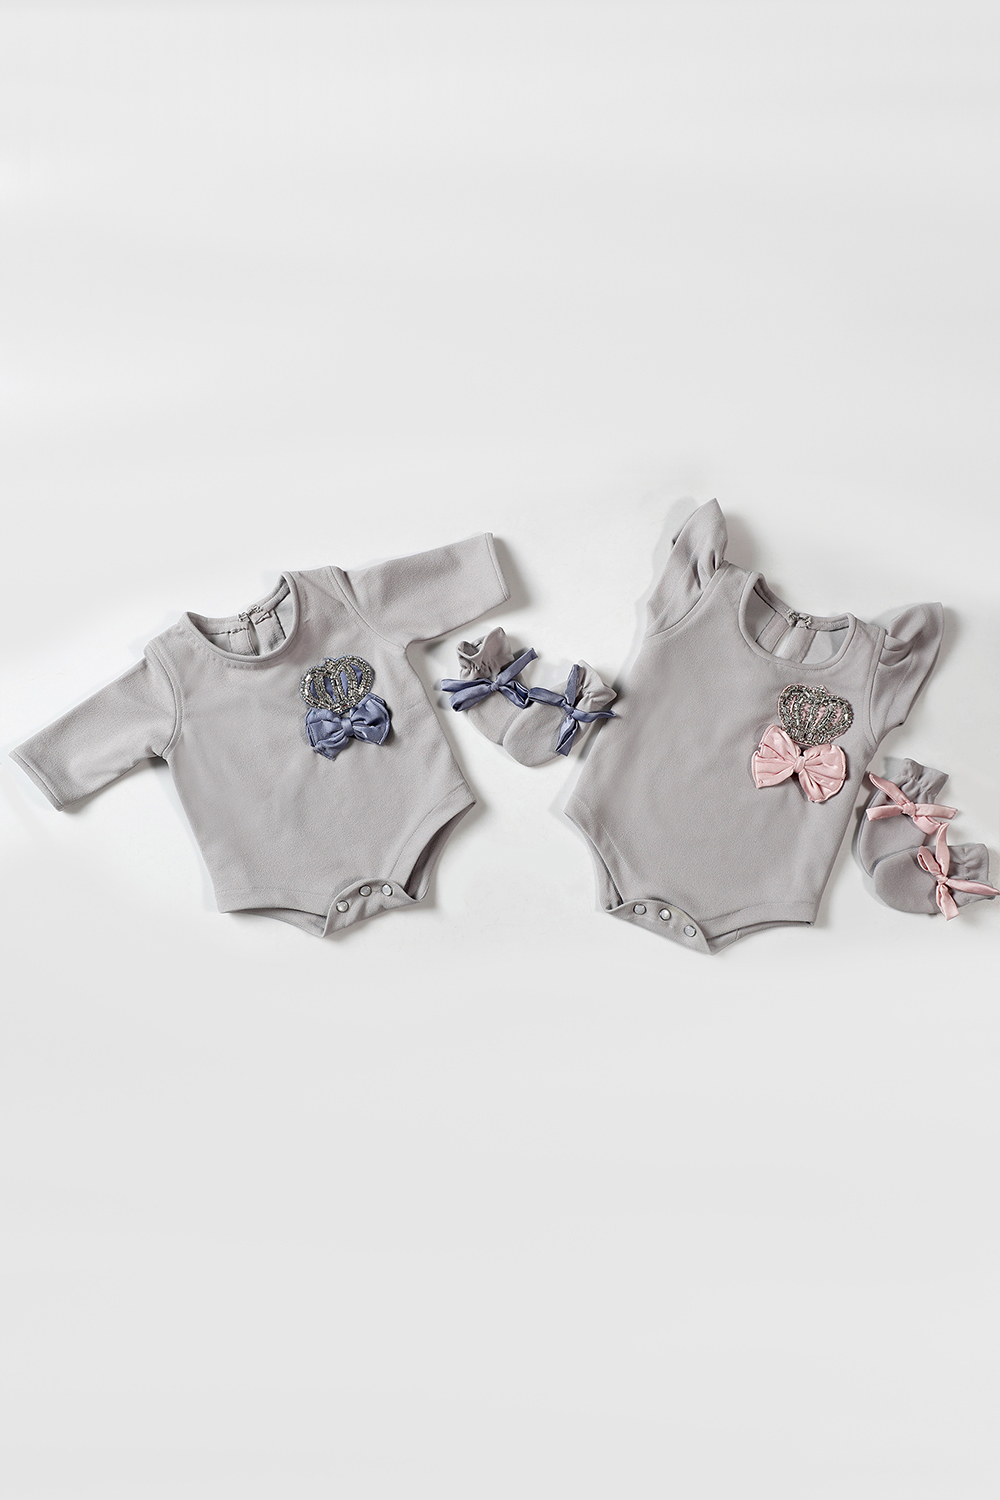 Crowned Jewelled Baby Boy Set